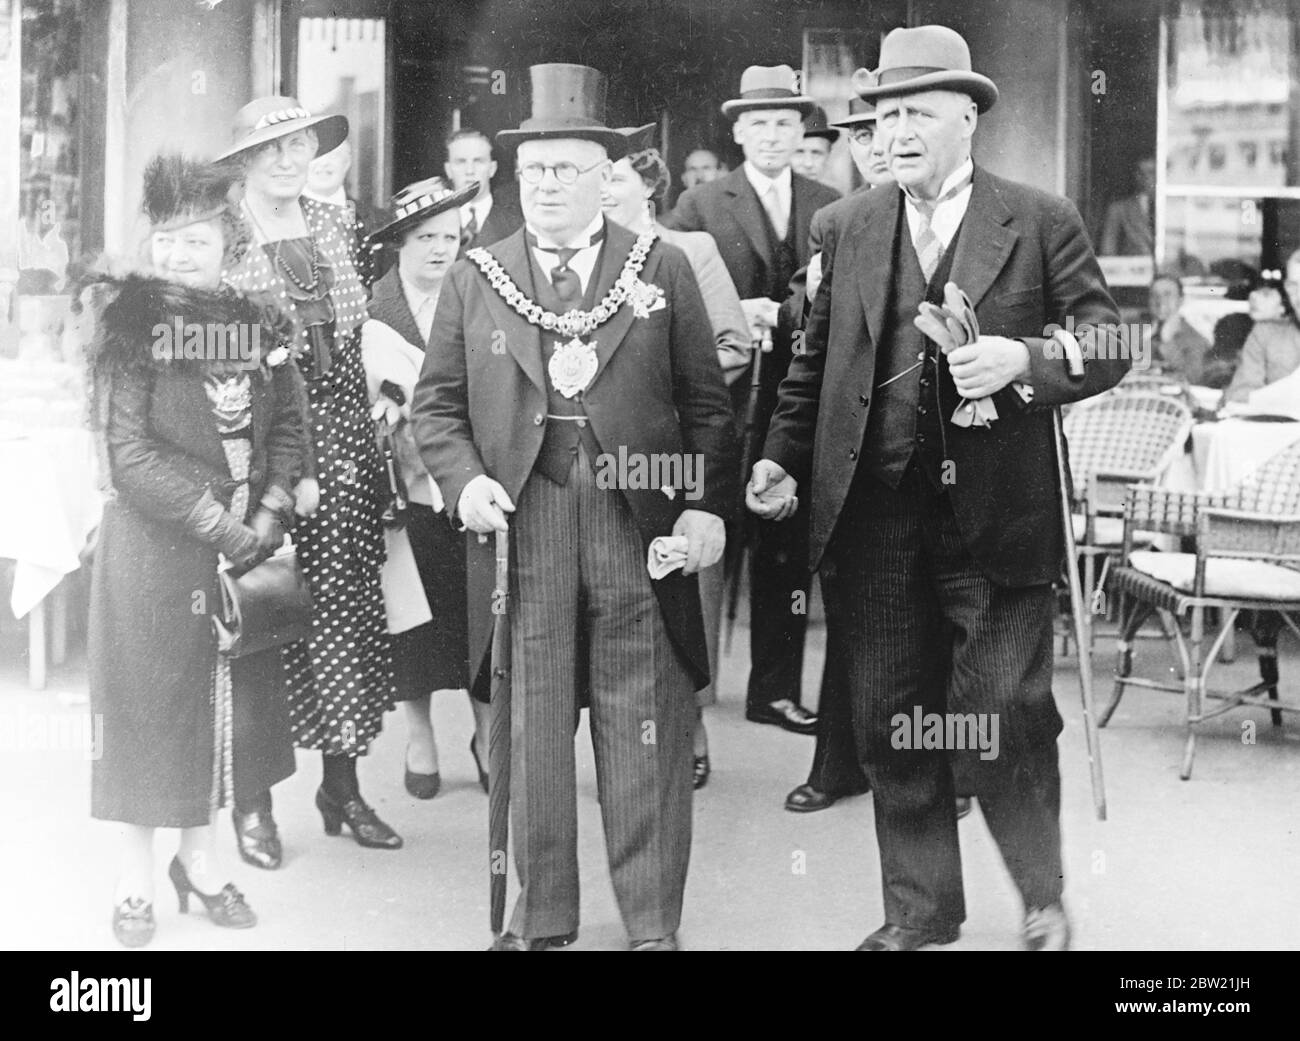 Alderman J Toole, Lord Mayor of Manchester, with Mayor Hedebol of Copenhagen (right) during a tour of the city. The visit of the two mayors is designed to strengthen friendly relations between the countries. After opening a gas works he received a gift of a walking stick from the manager. 6 September 1937. Stock Photo